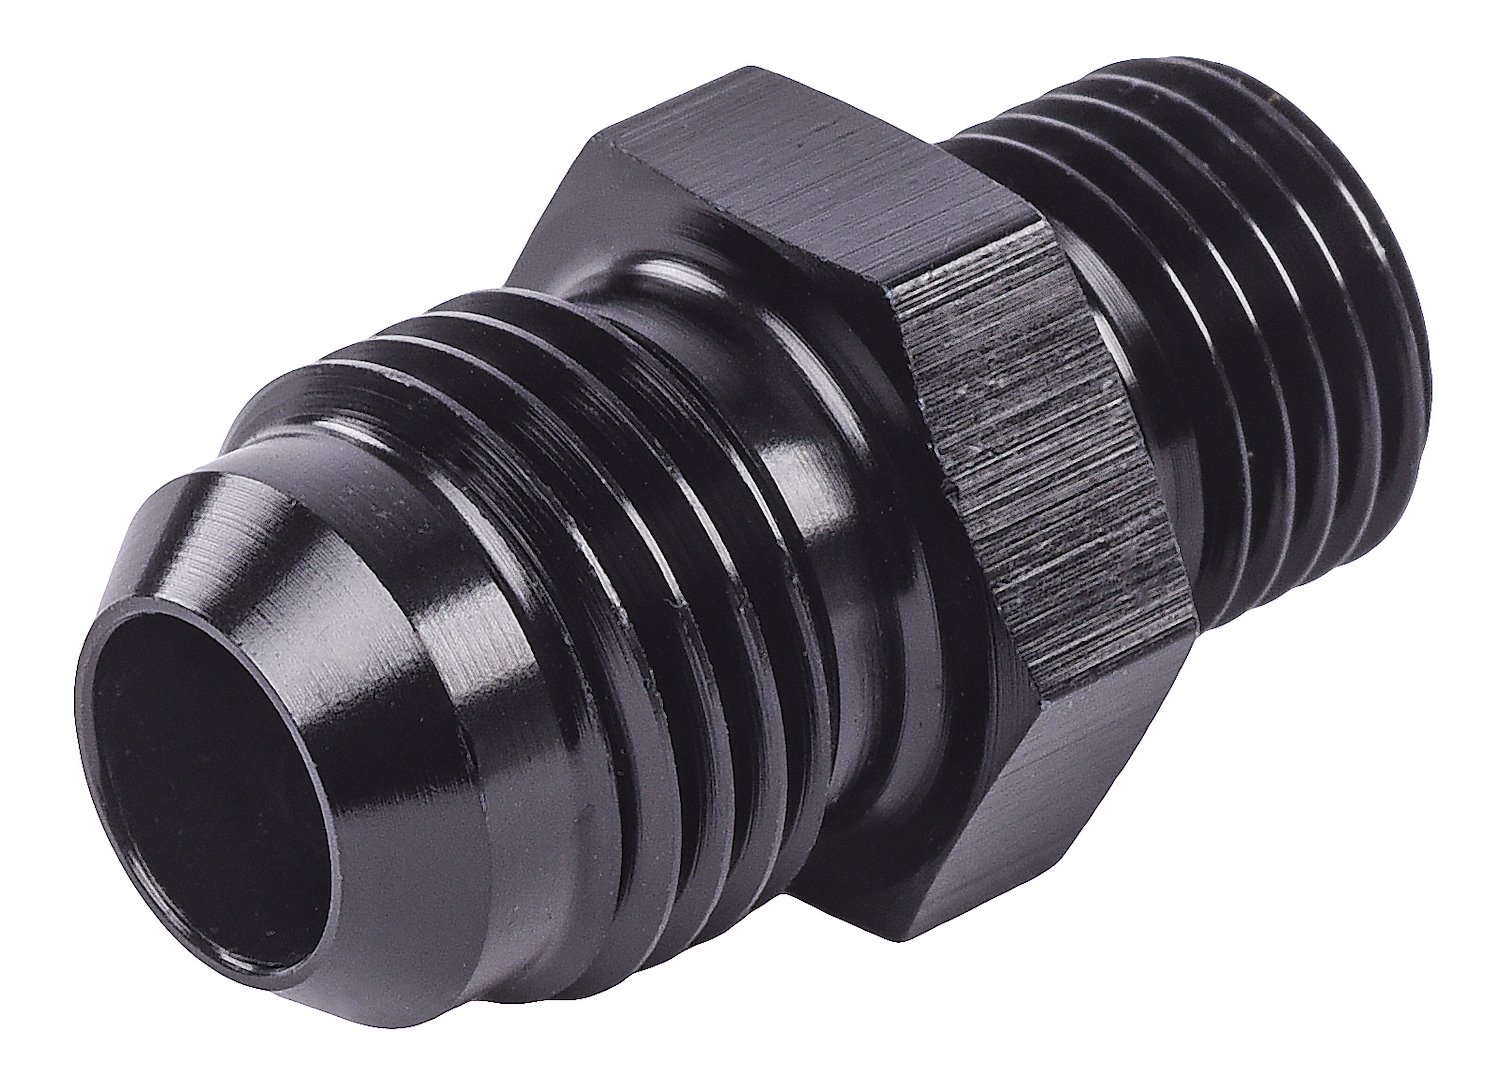 AN to Metric Adapter Fitting [-6 AN Male to 12 mm x 1.25 Male, Black]